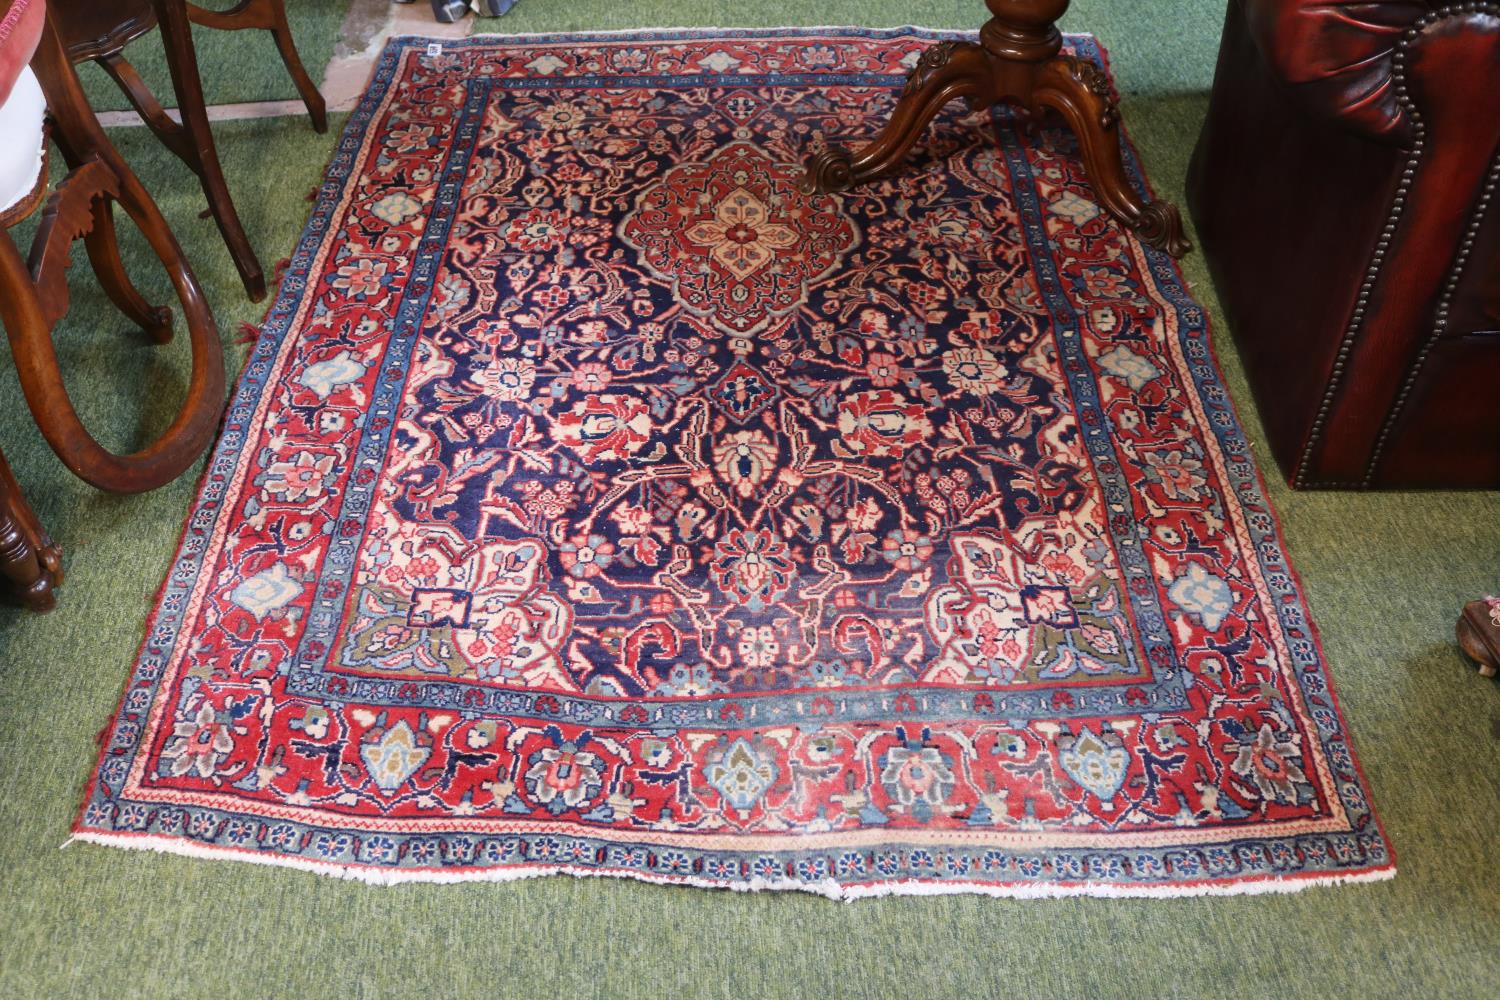 Good quality Red Ground Rug with central medallion 165cm in Length